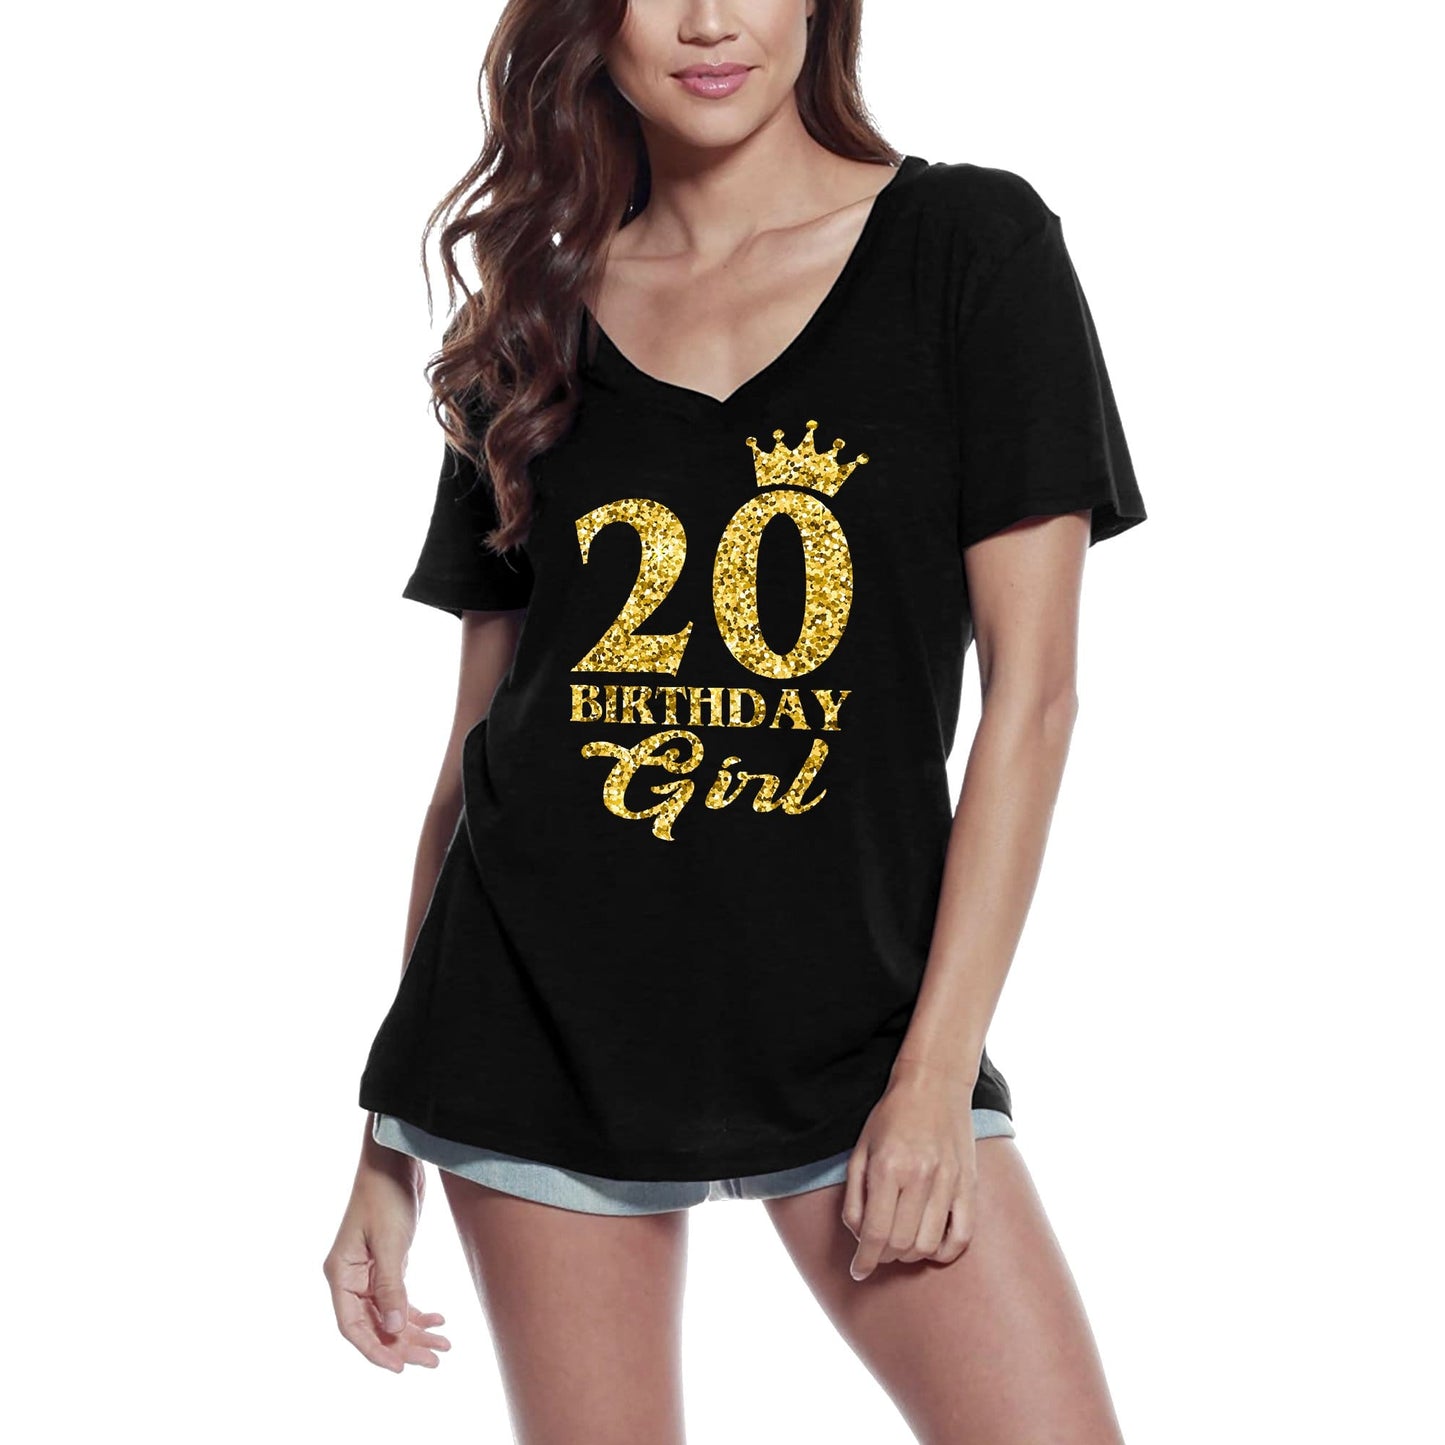 ULTRABASIC Women's T-Shirt 20 and Fabulous - Shirt for 20th Birthday Gifts Novelty